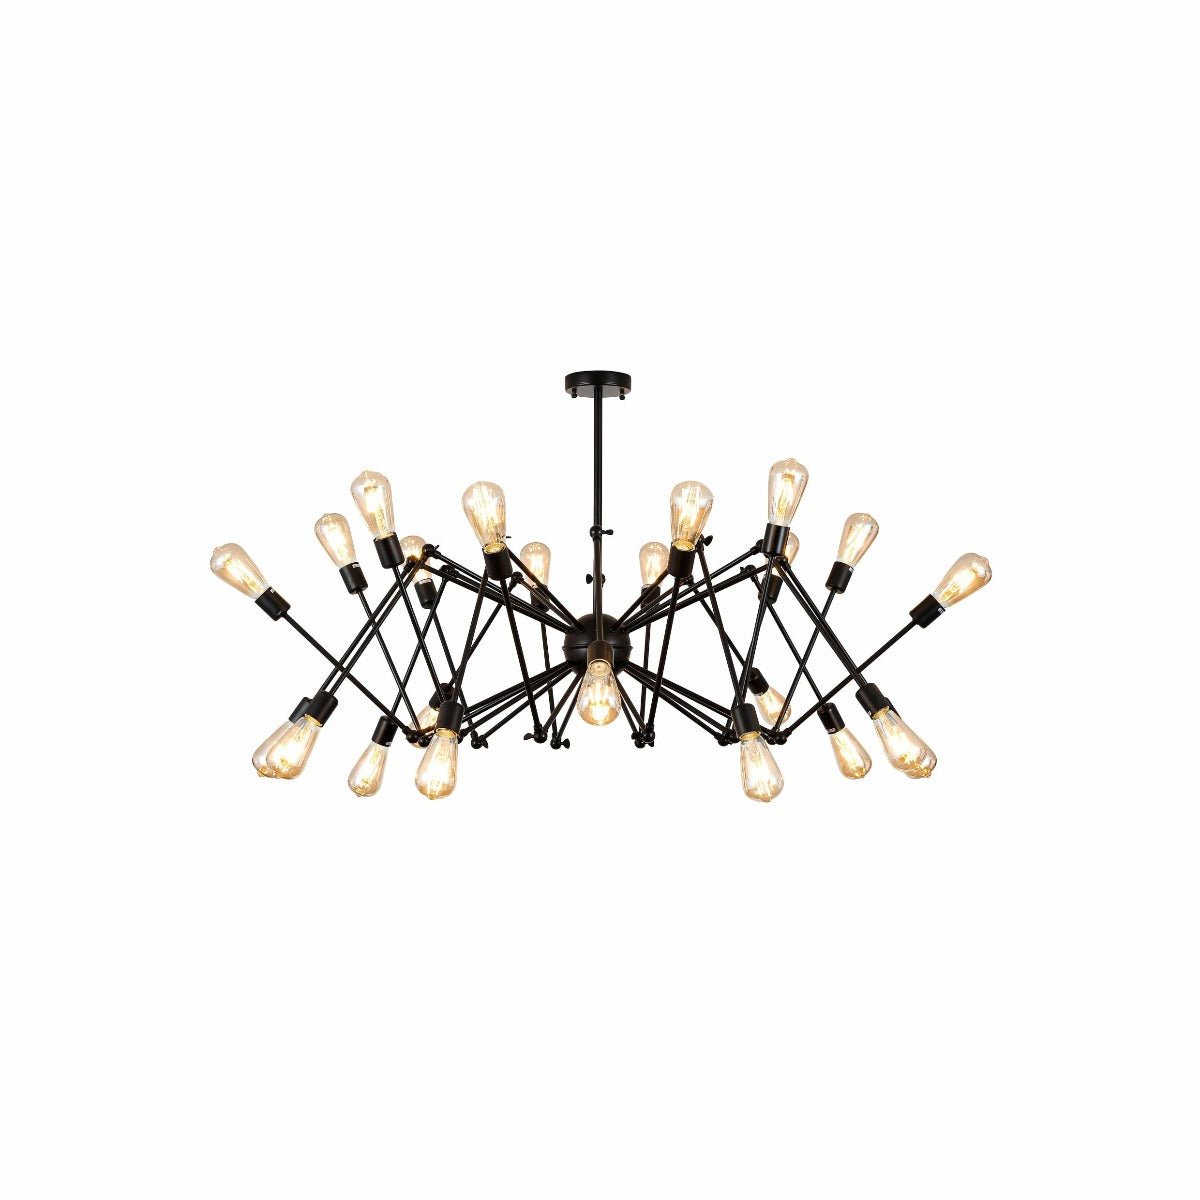 Black hinged rod metal spider chandelier with 24xe27 fitting in indoor setting 158-17589